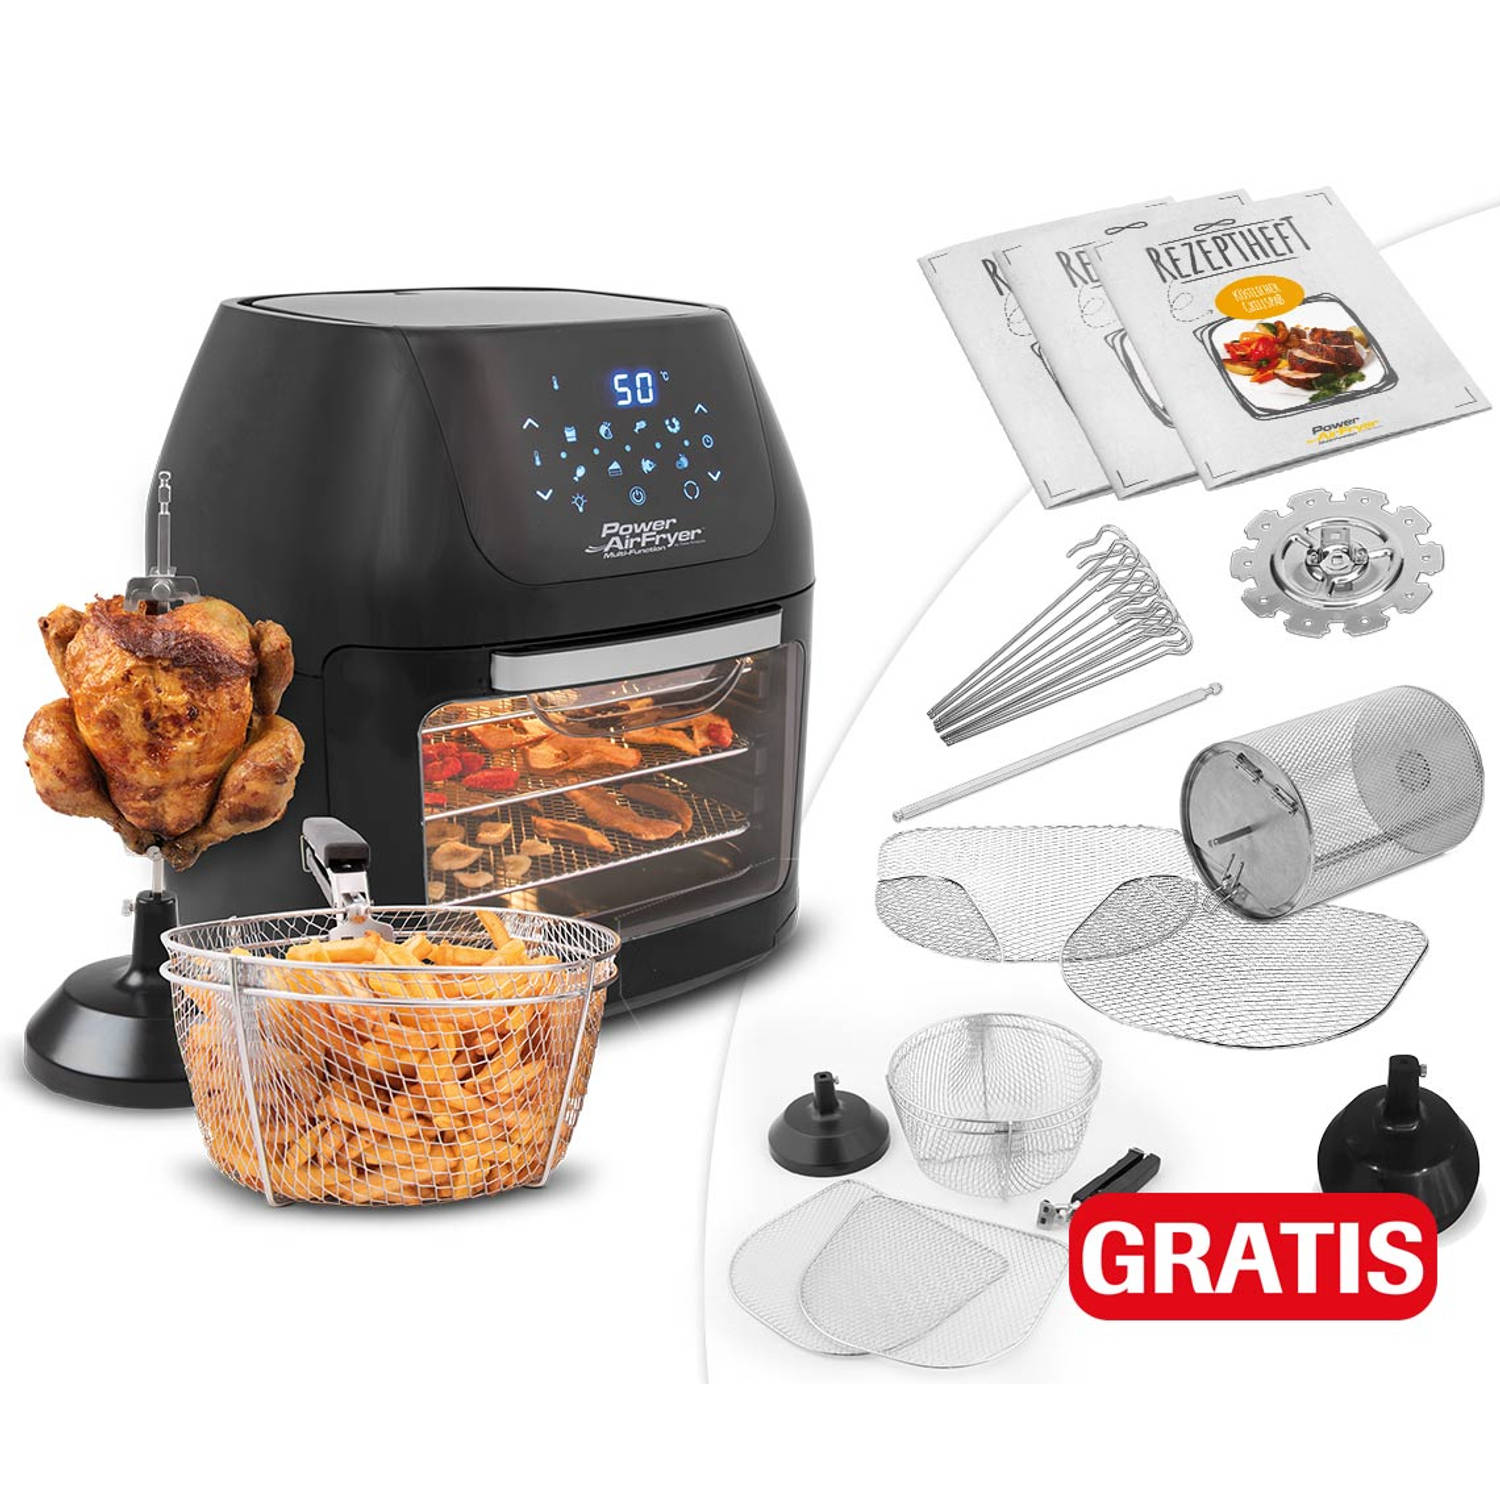 Power AirFryer Multi-Function Deluxe |